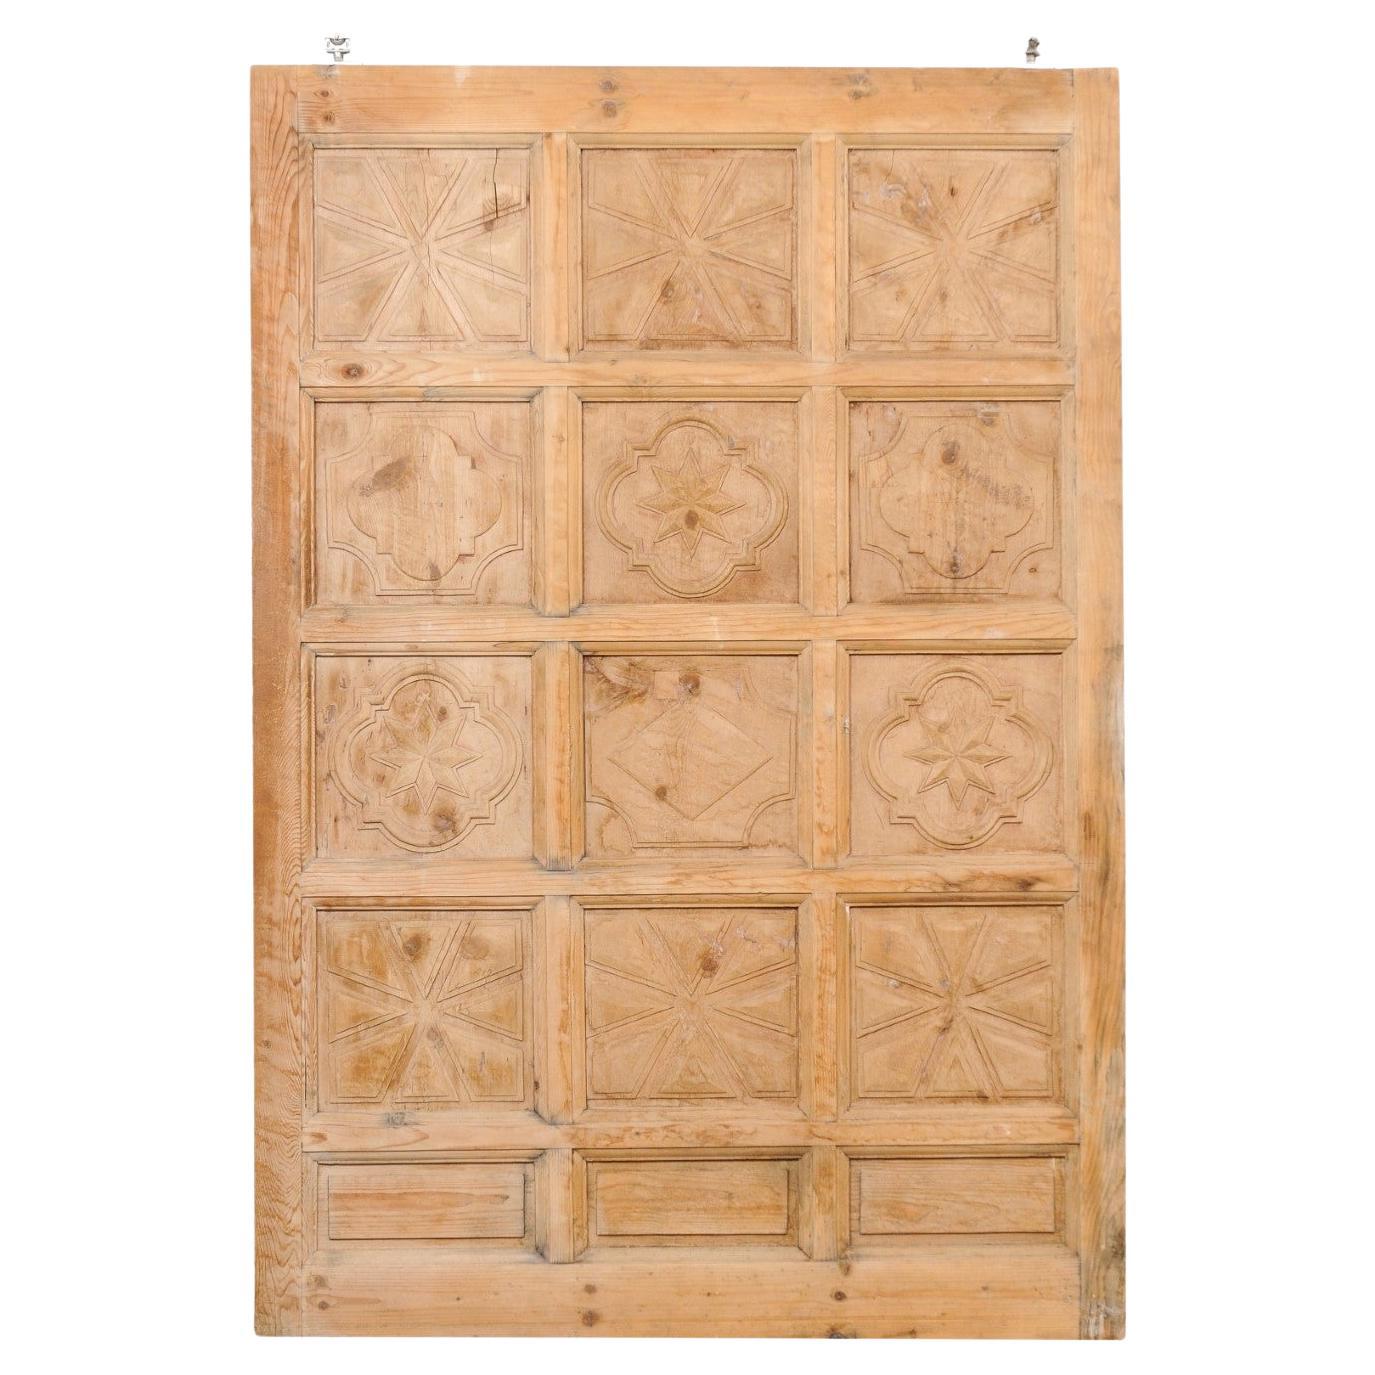 A Large-Sized Spanish Wooden Door w/Decoratively Carved Panels